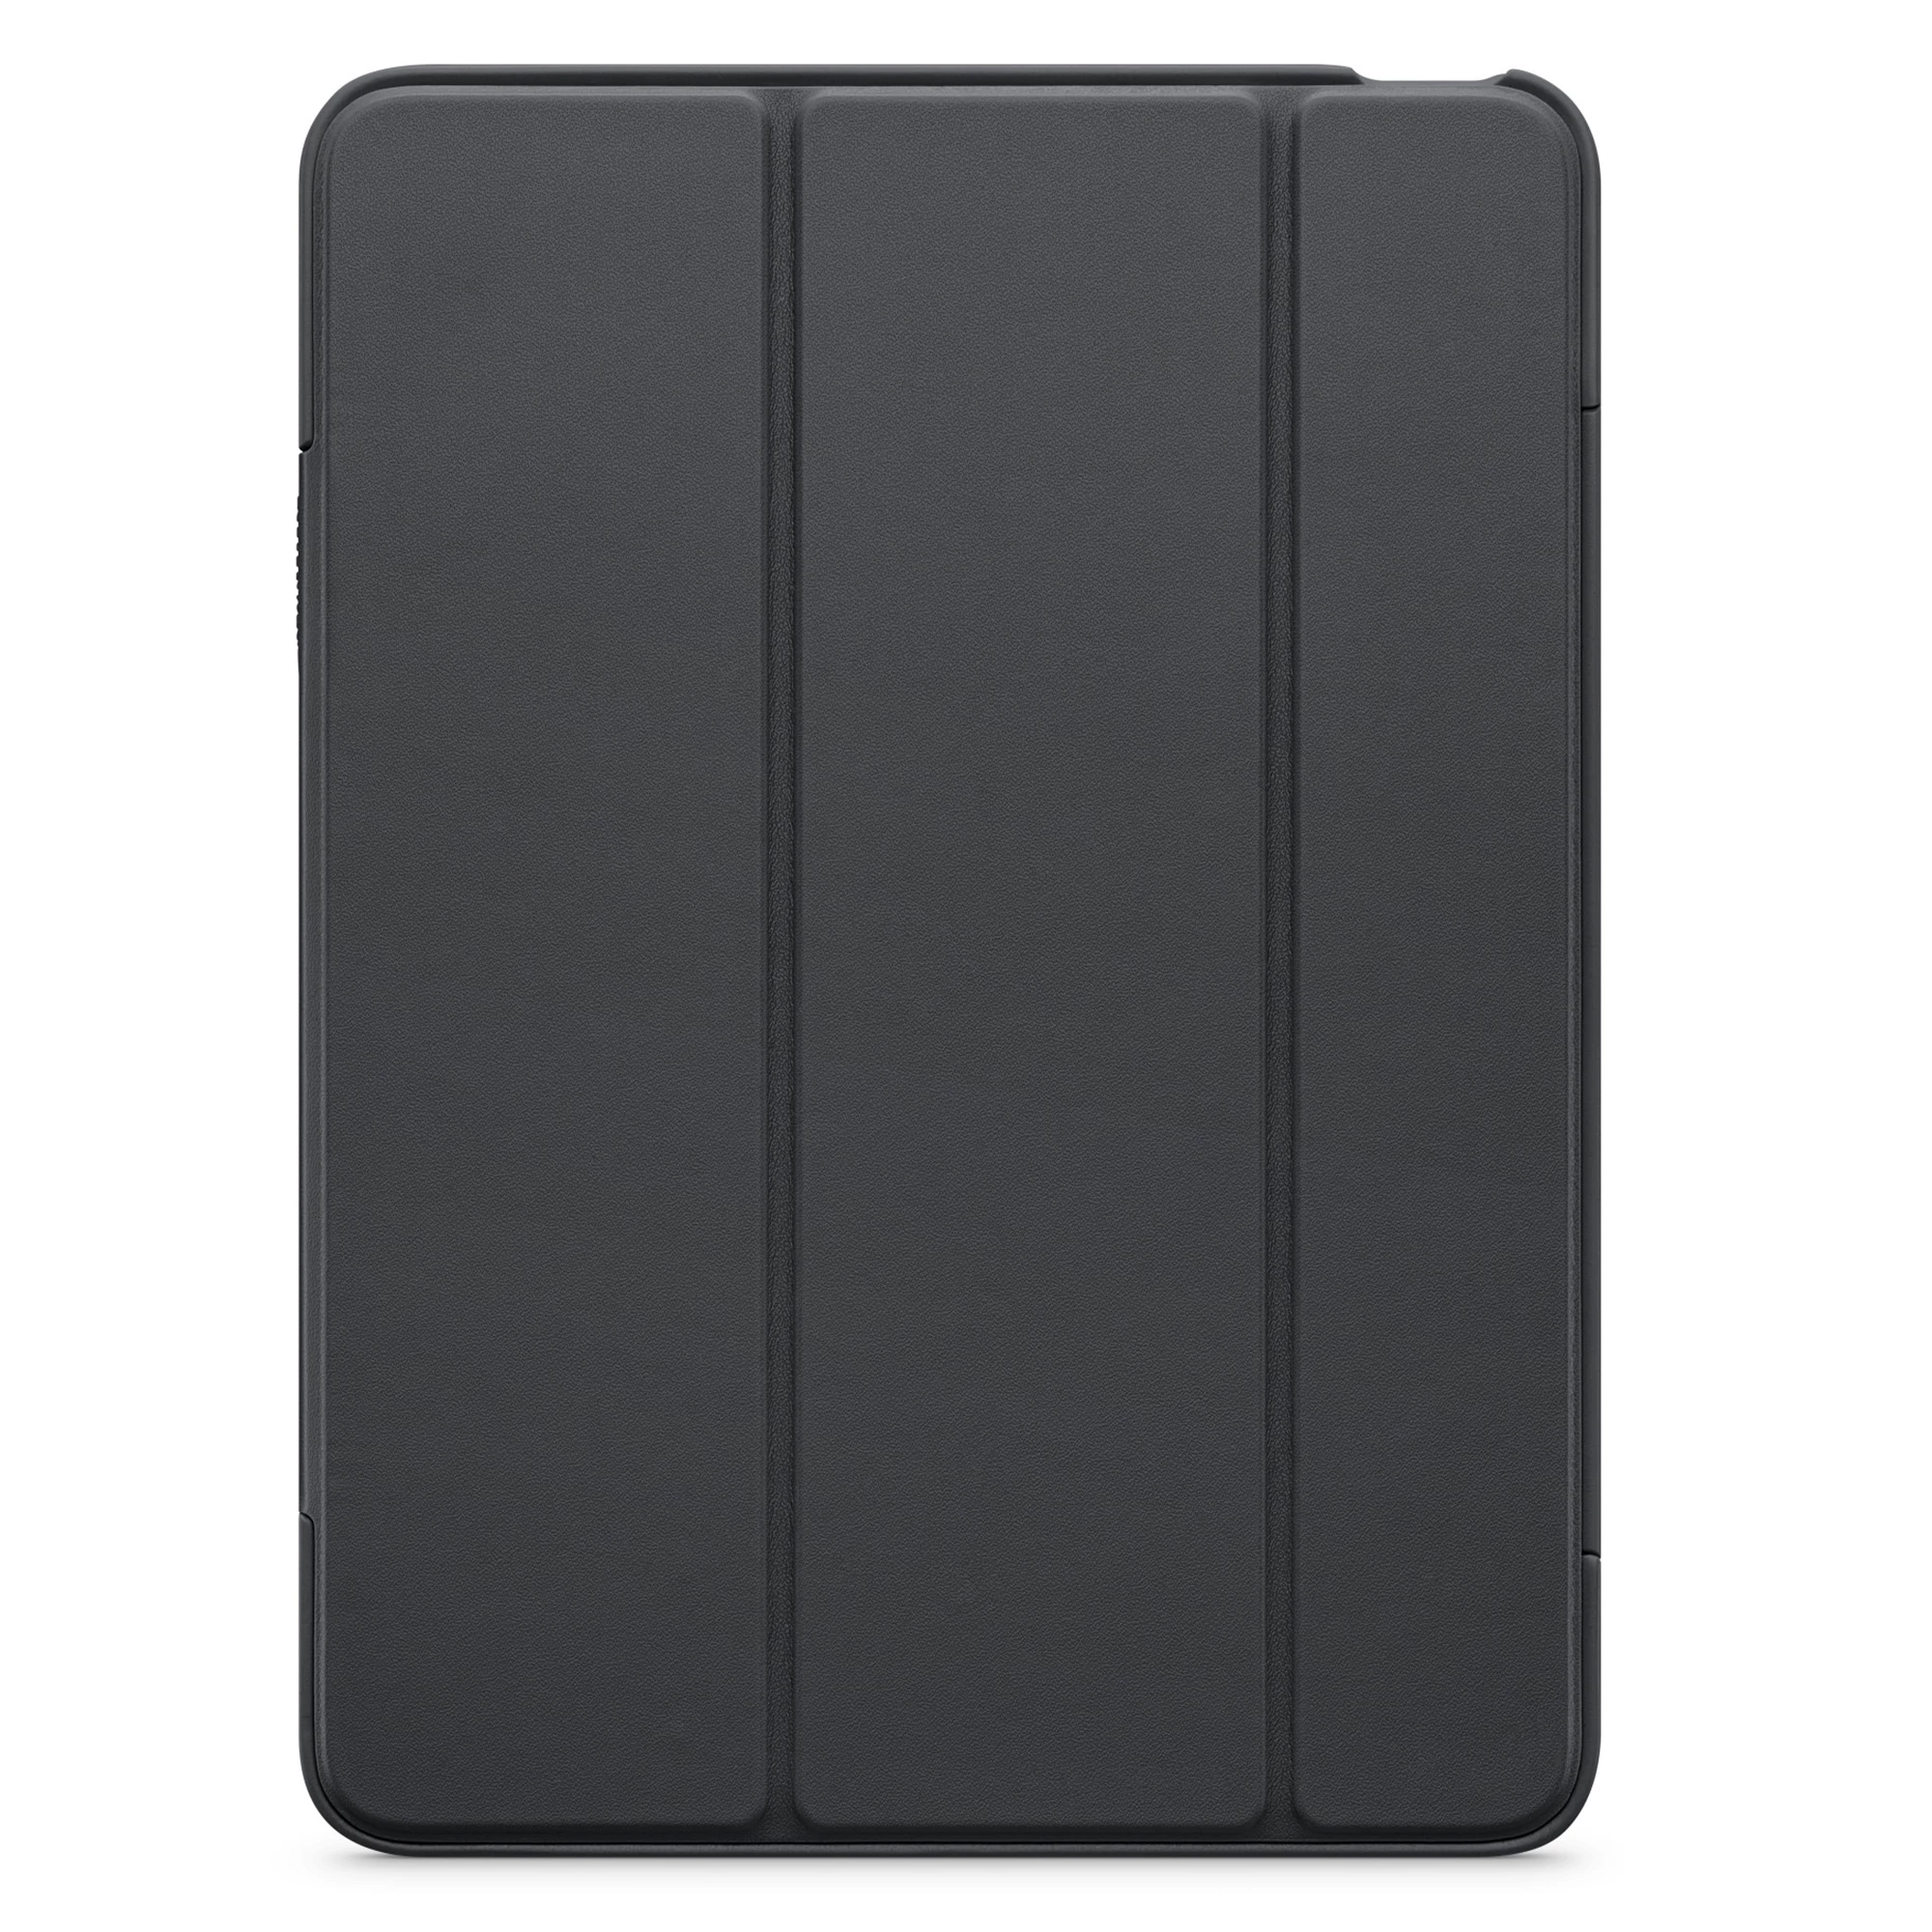 OtterBox Symmetry Series 360 Elite Case Case for iPad Air (4th and 5th generation) - Gray (HPZ92)